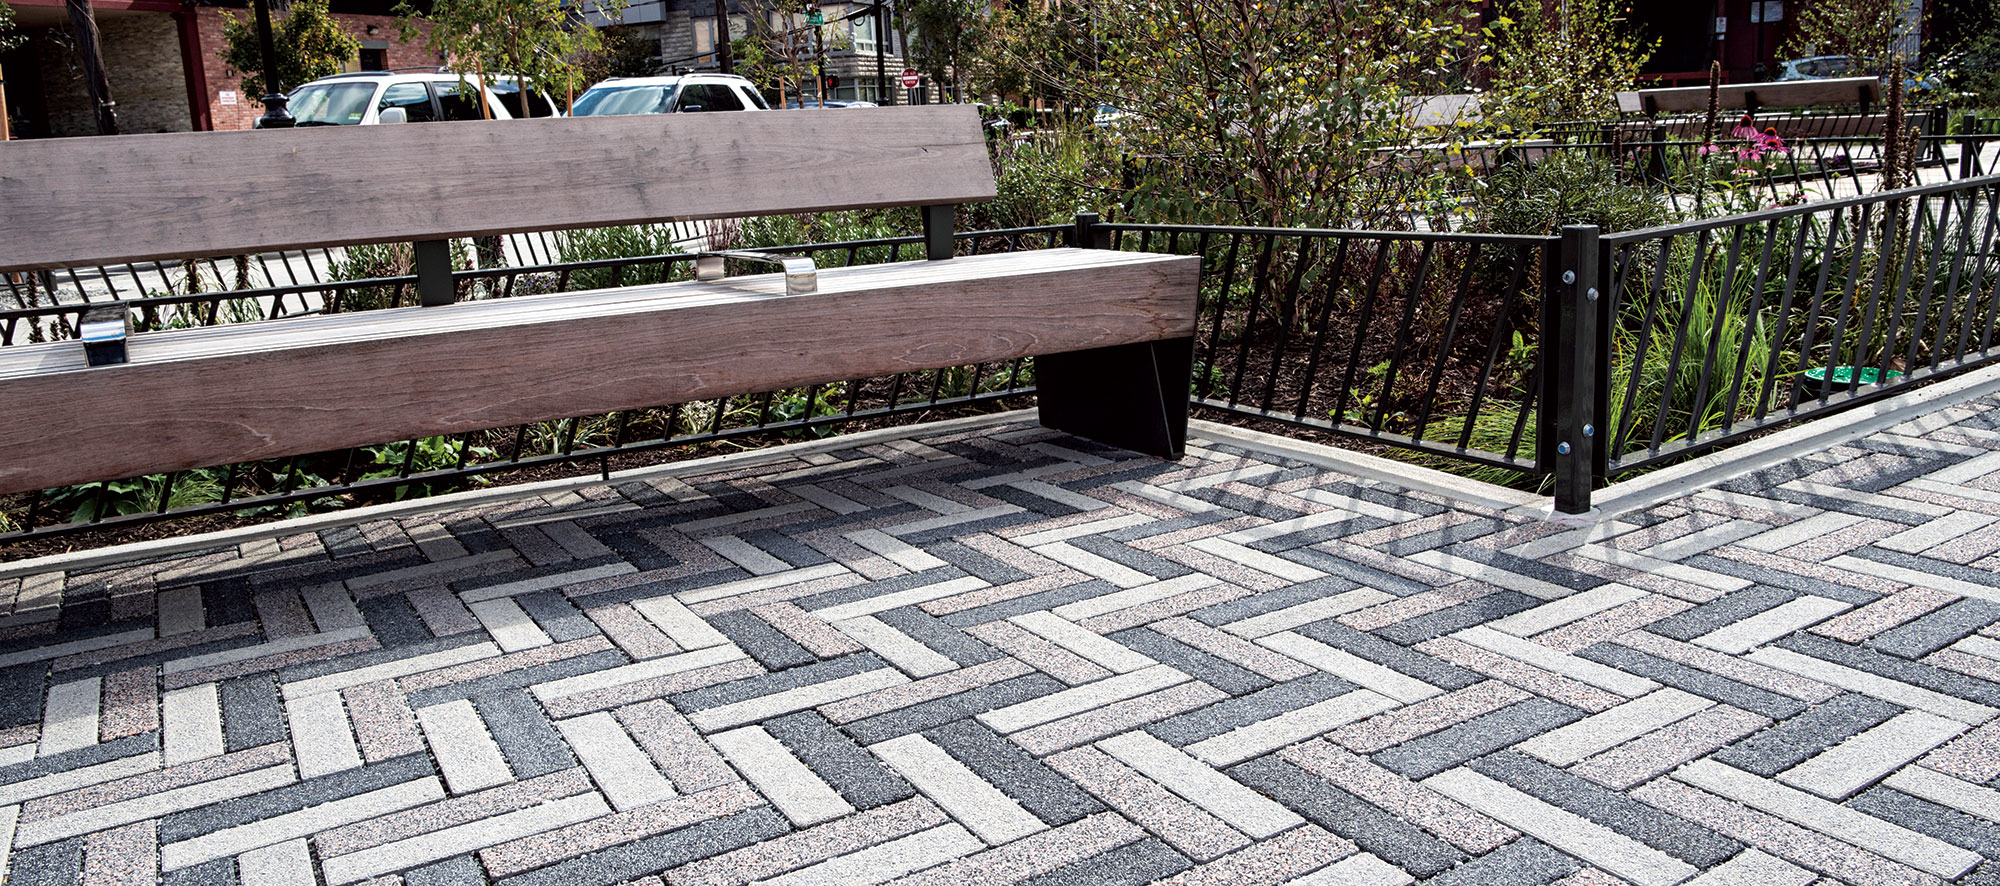 Tri-colored Eco-Promenade pavers glimmer next to a distinct wooden park bench, with an adjacent green island outlined by metal fencing.